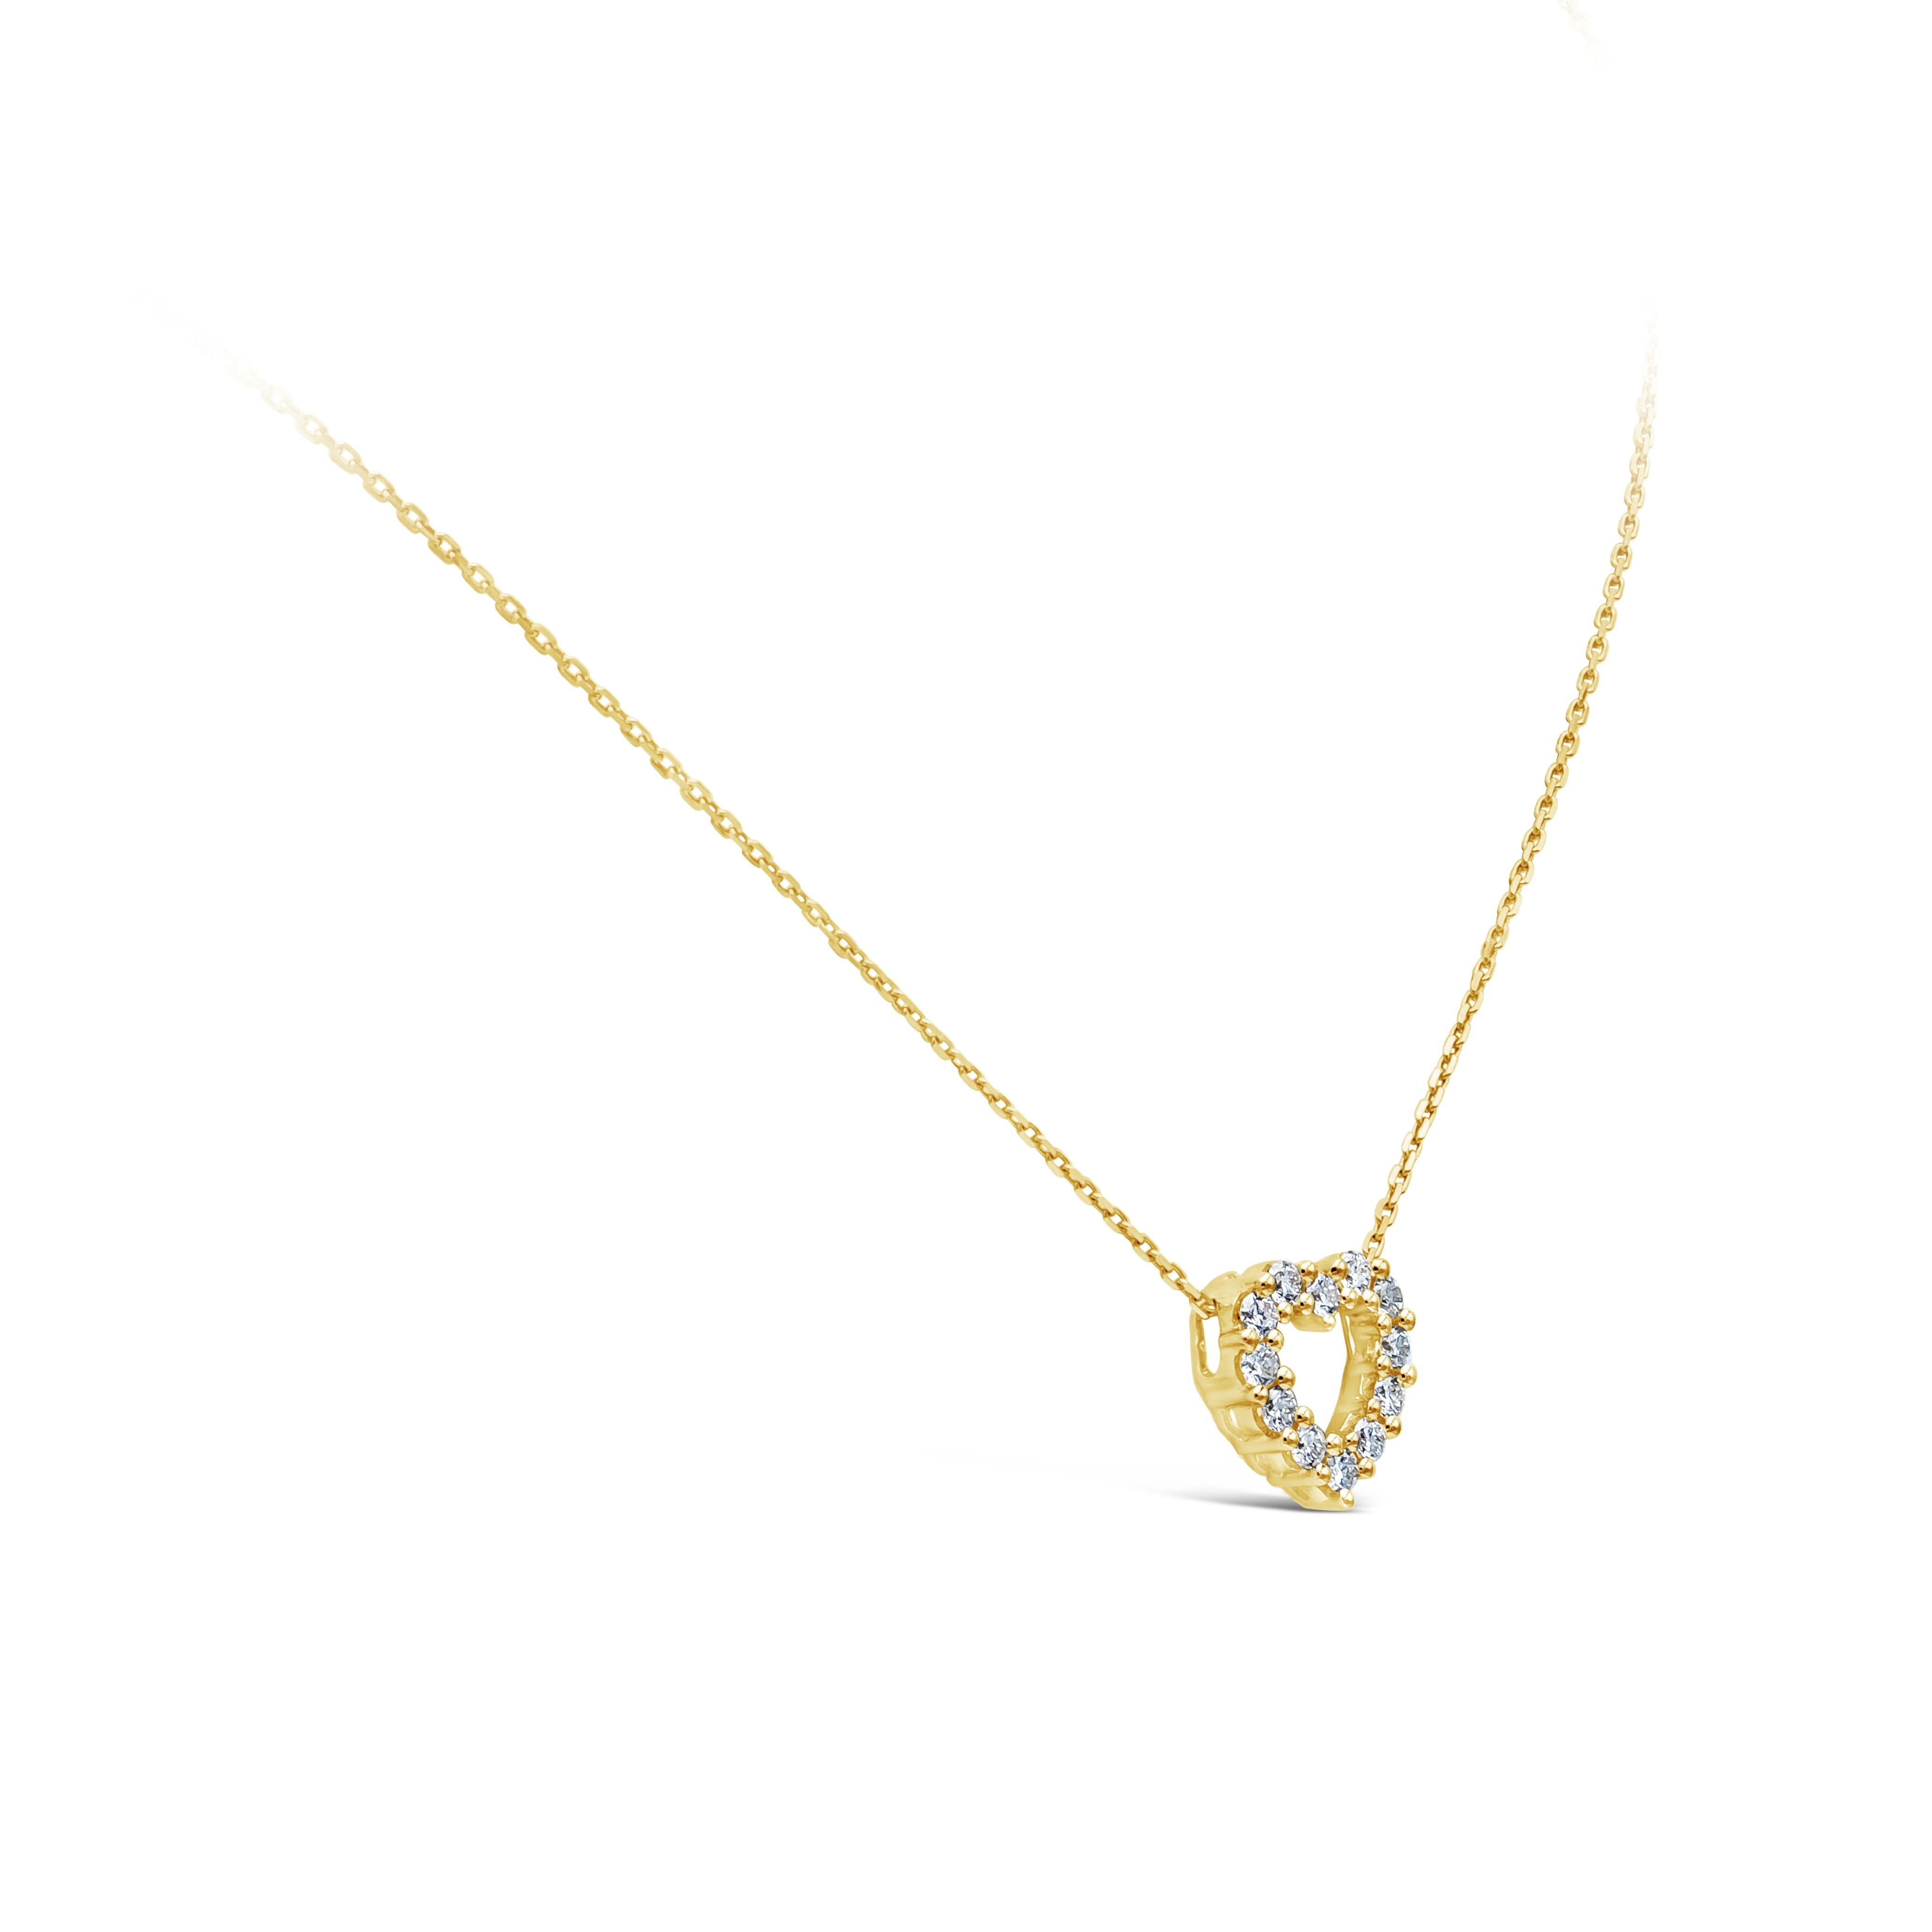 A simple pendant necklace showcasing a row of 12 round brilliant diamonds, set in an open-work heart shape mounting made in 18k yellow gold. Diamonds weigh 0.34 carats total, G color, VS-SI in clarity. Suspended on a 16 inch adjustable yellow gold